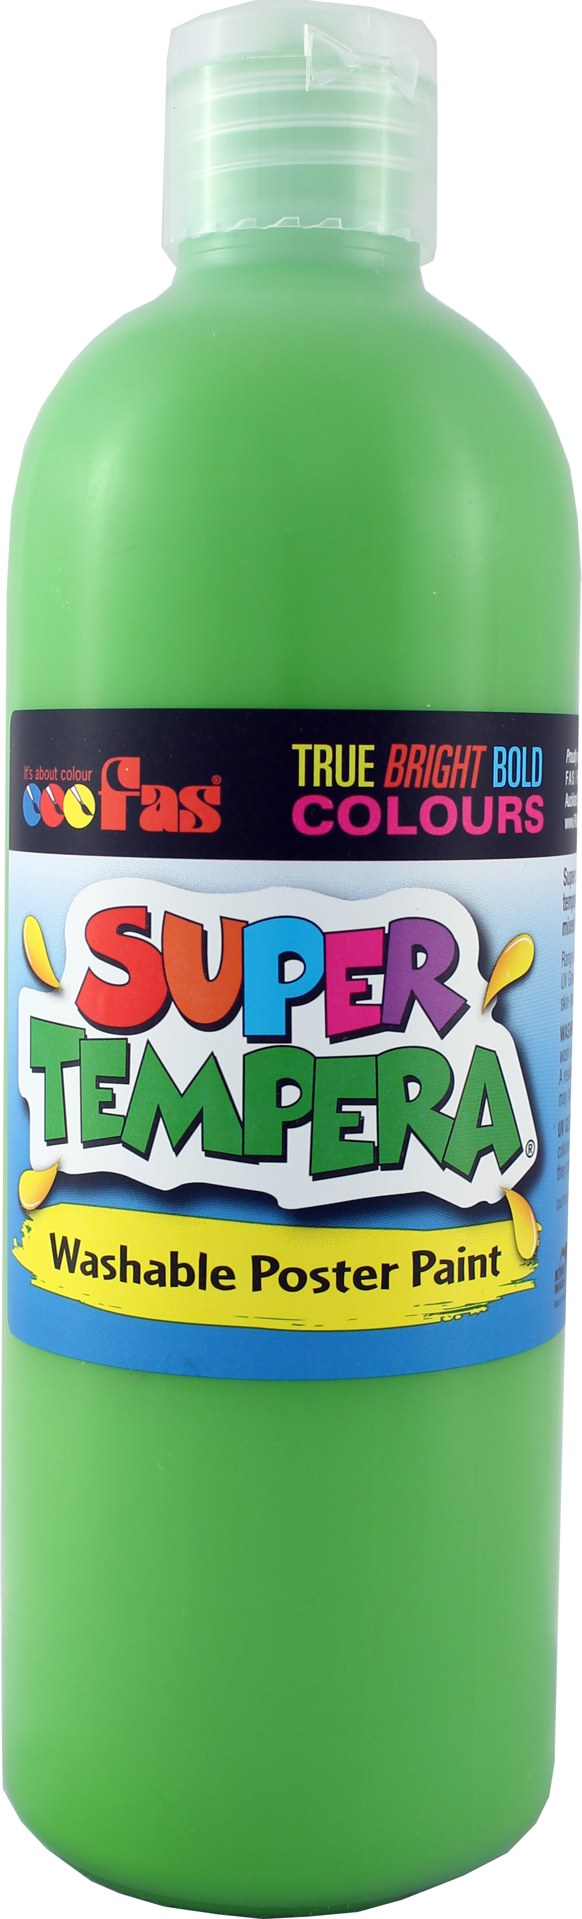 fas super tempera washable poster paint 500ml